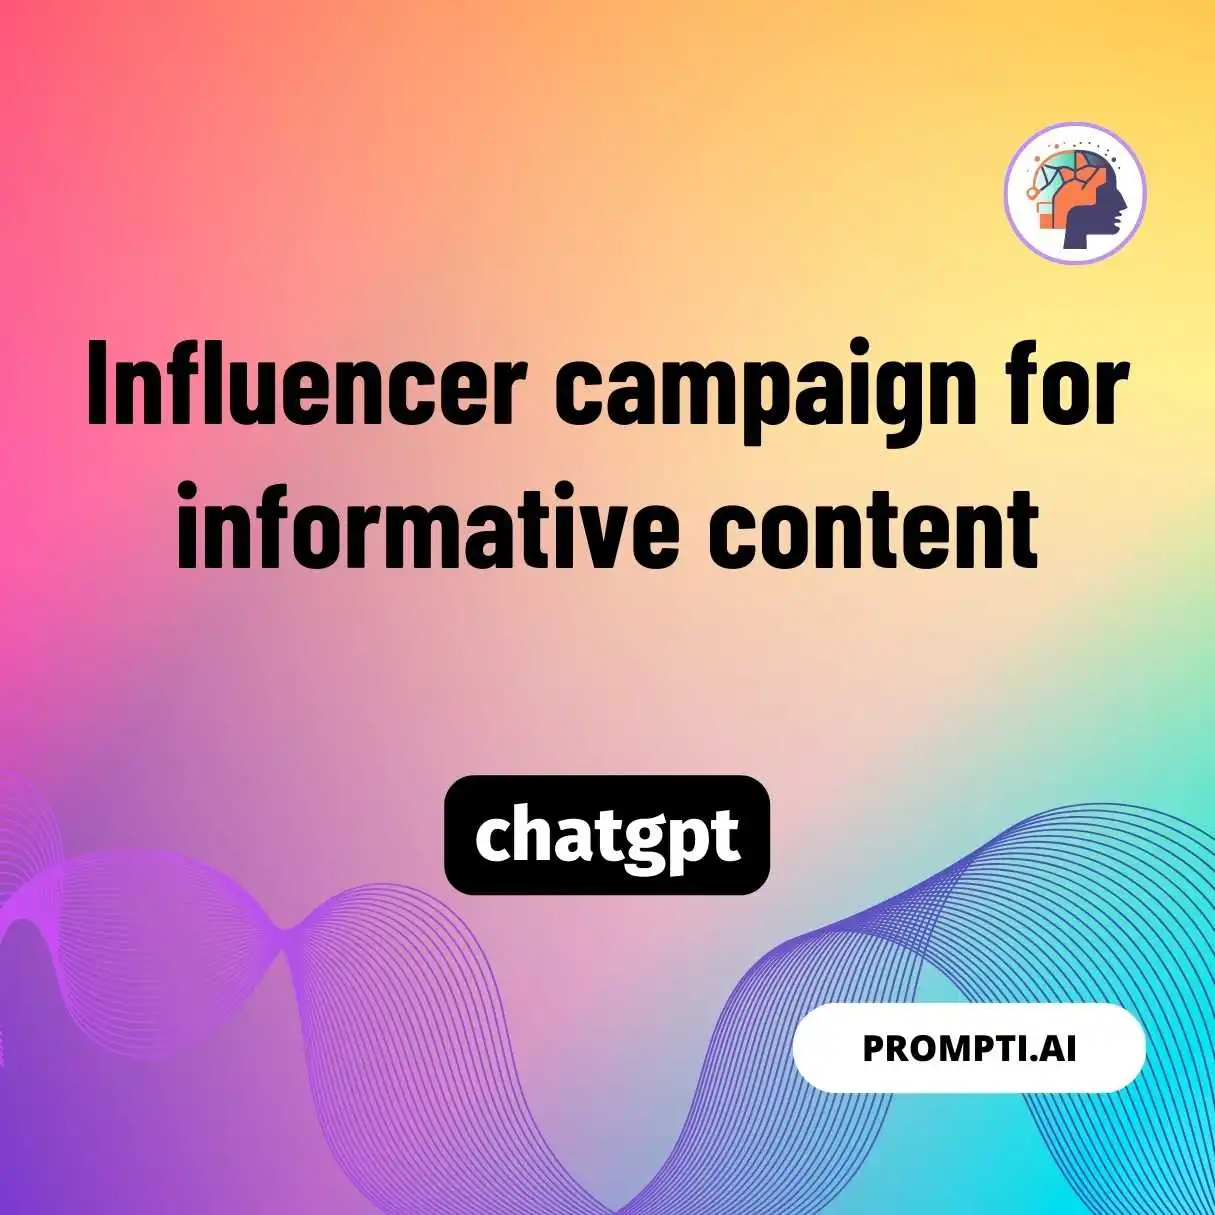 Influencer campaign for informative content